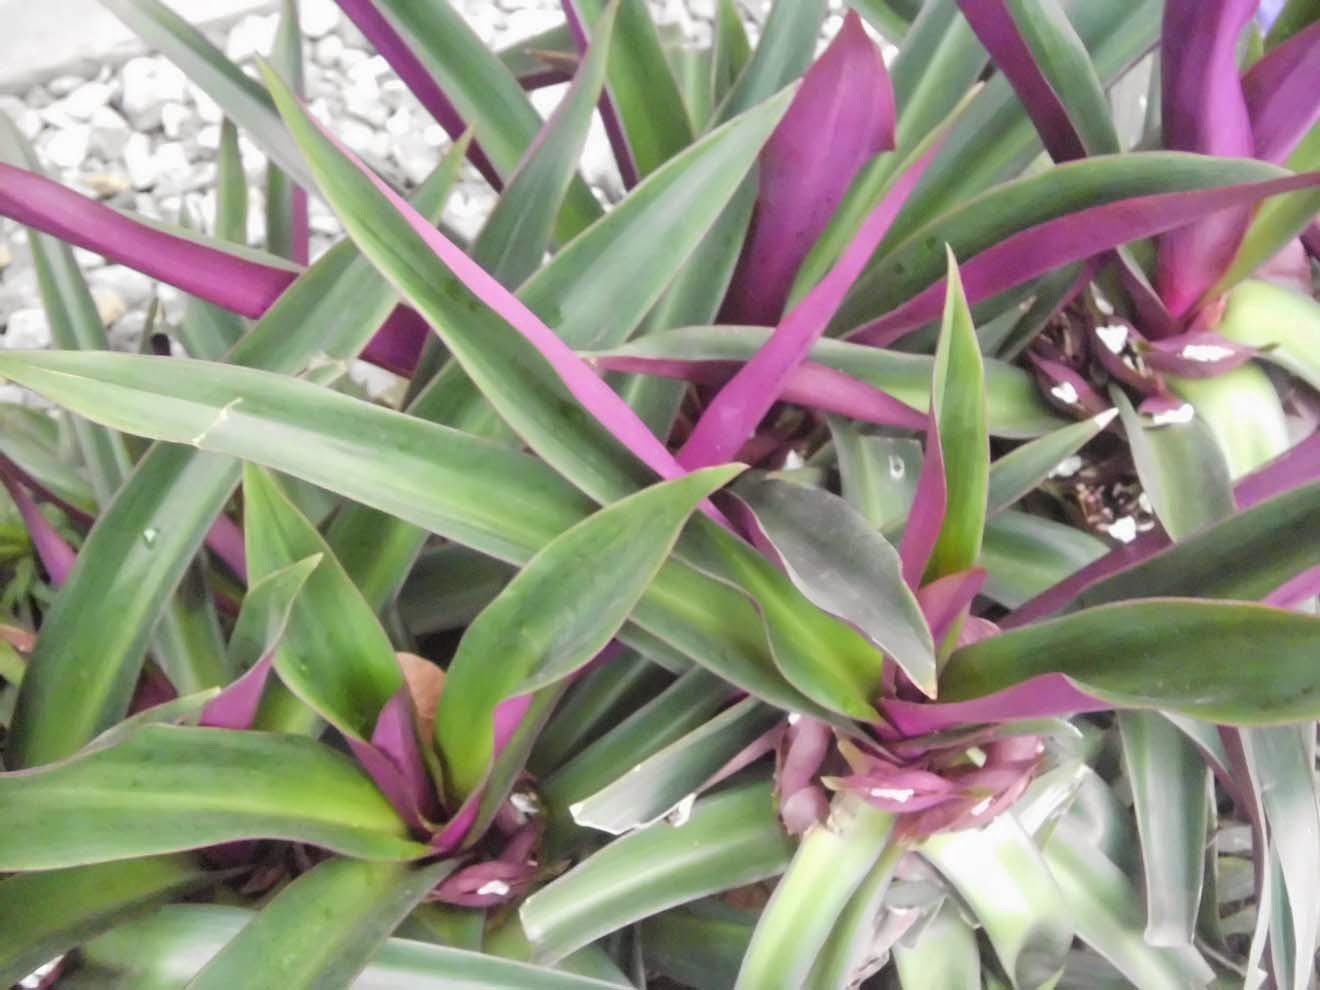 Moses in the cradle (Tradescantia Spathacea)